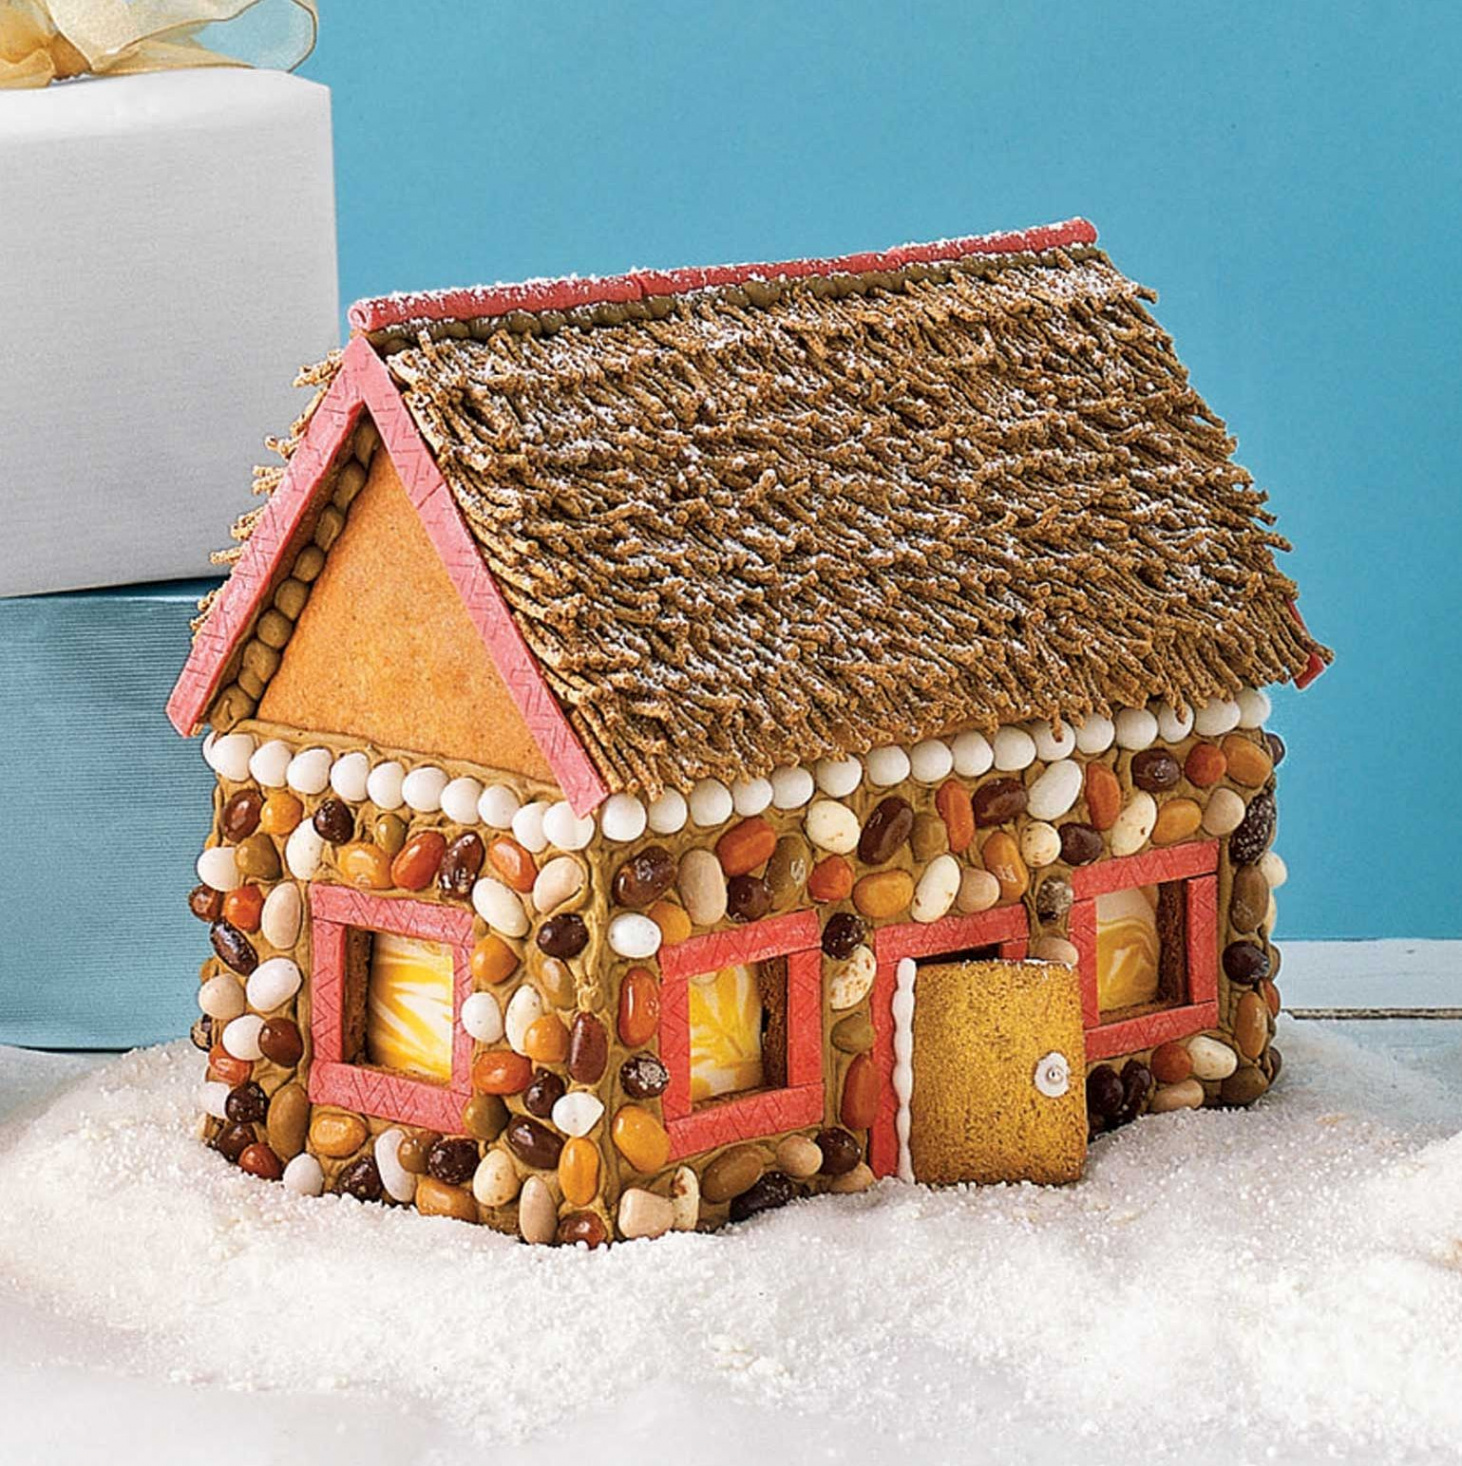 How to Make Beautiful Gingerbread House Cottages